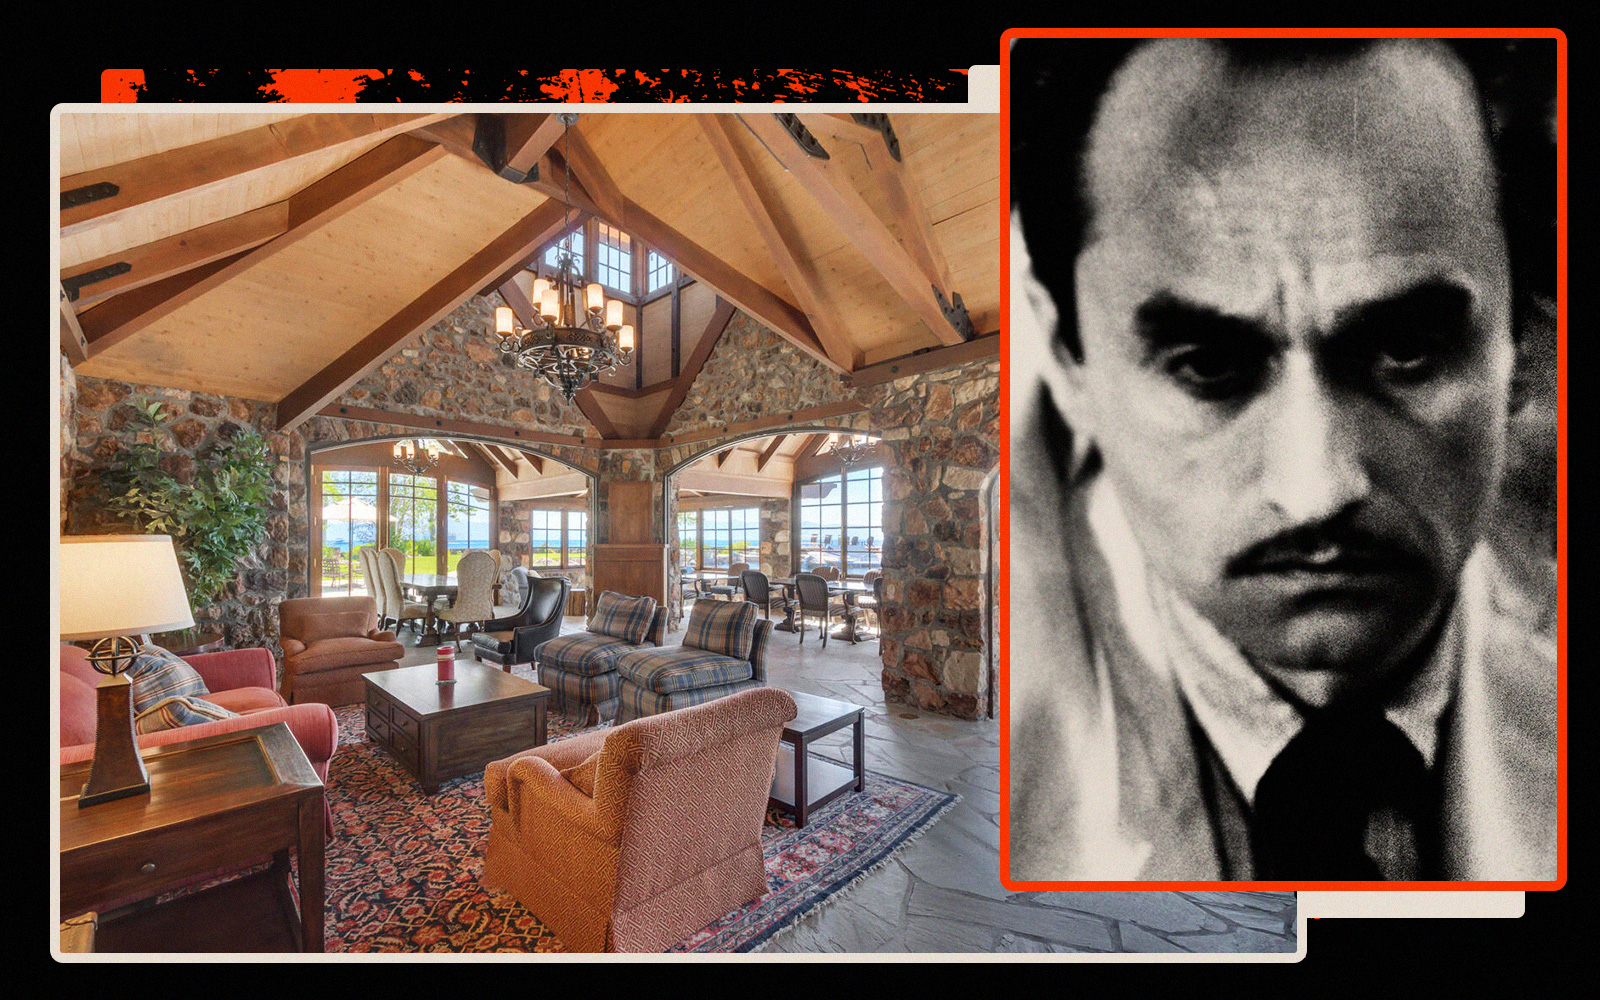 Lake Tahoe home in “The Godfather Part II” asks $30K in monthly rent 